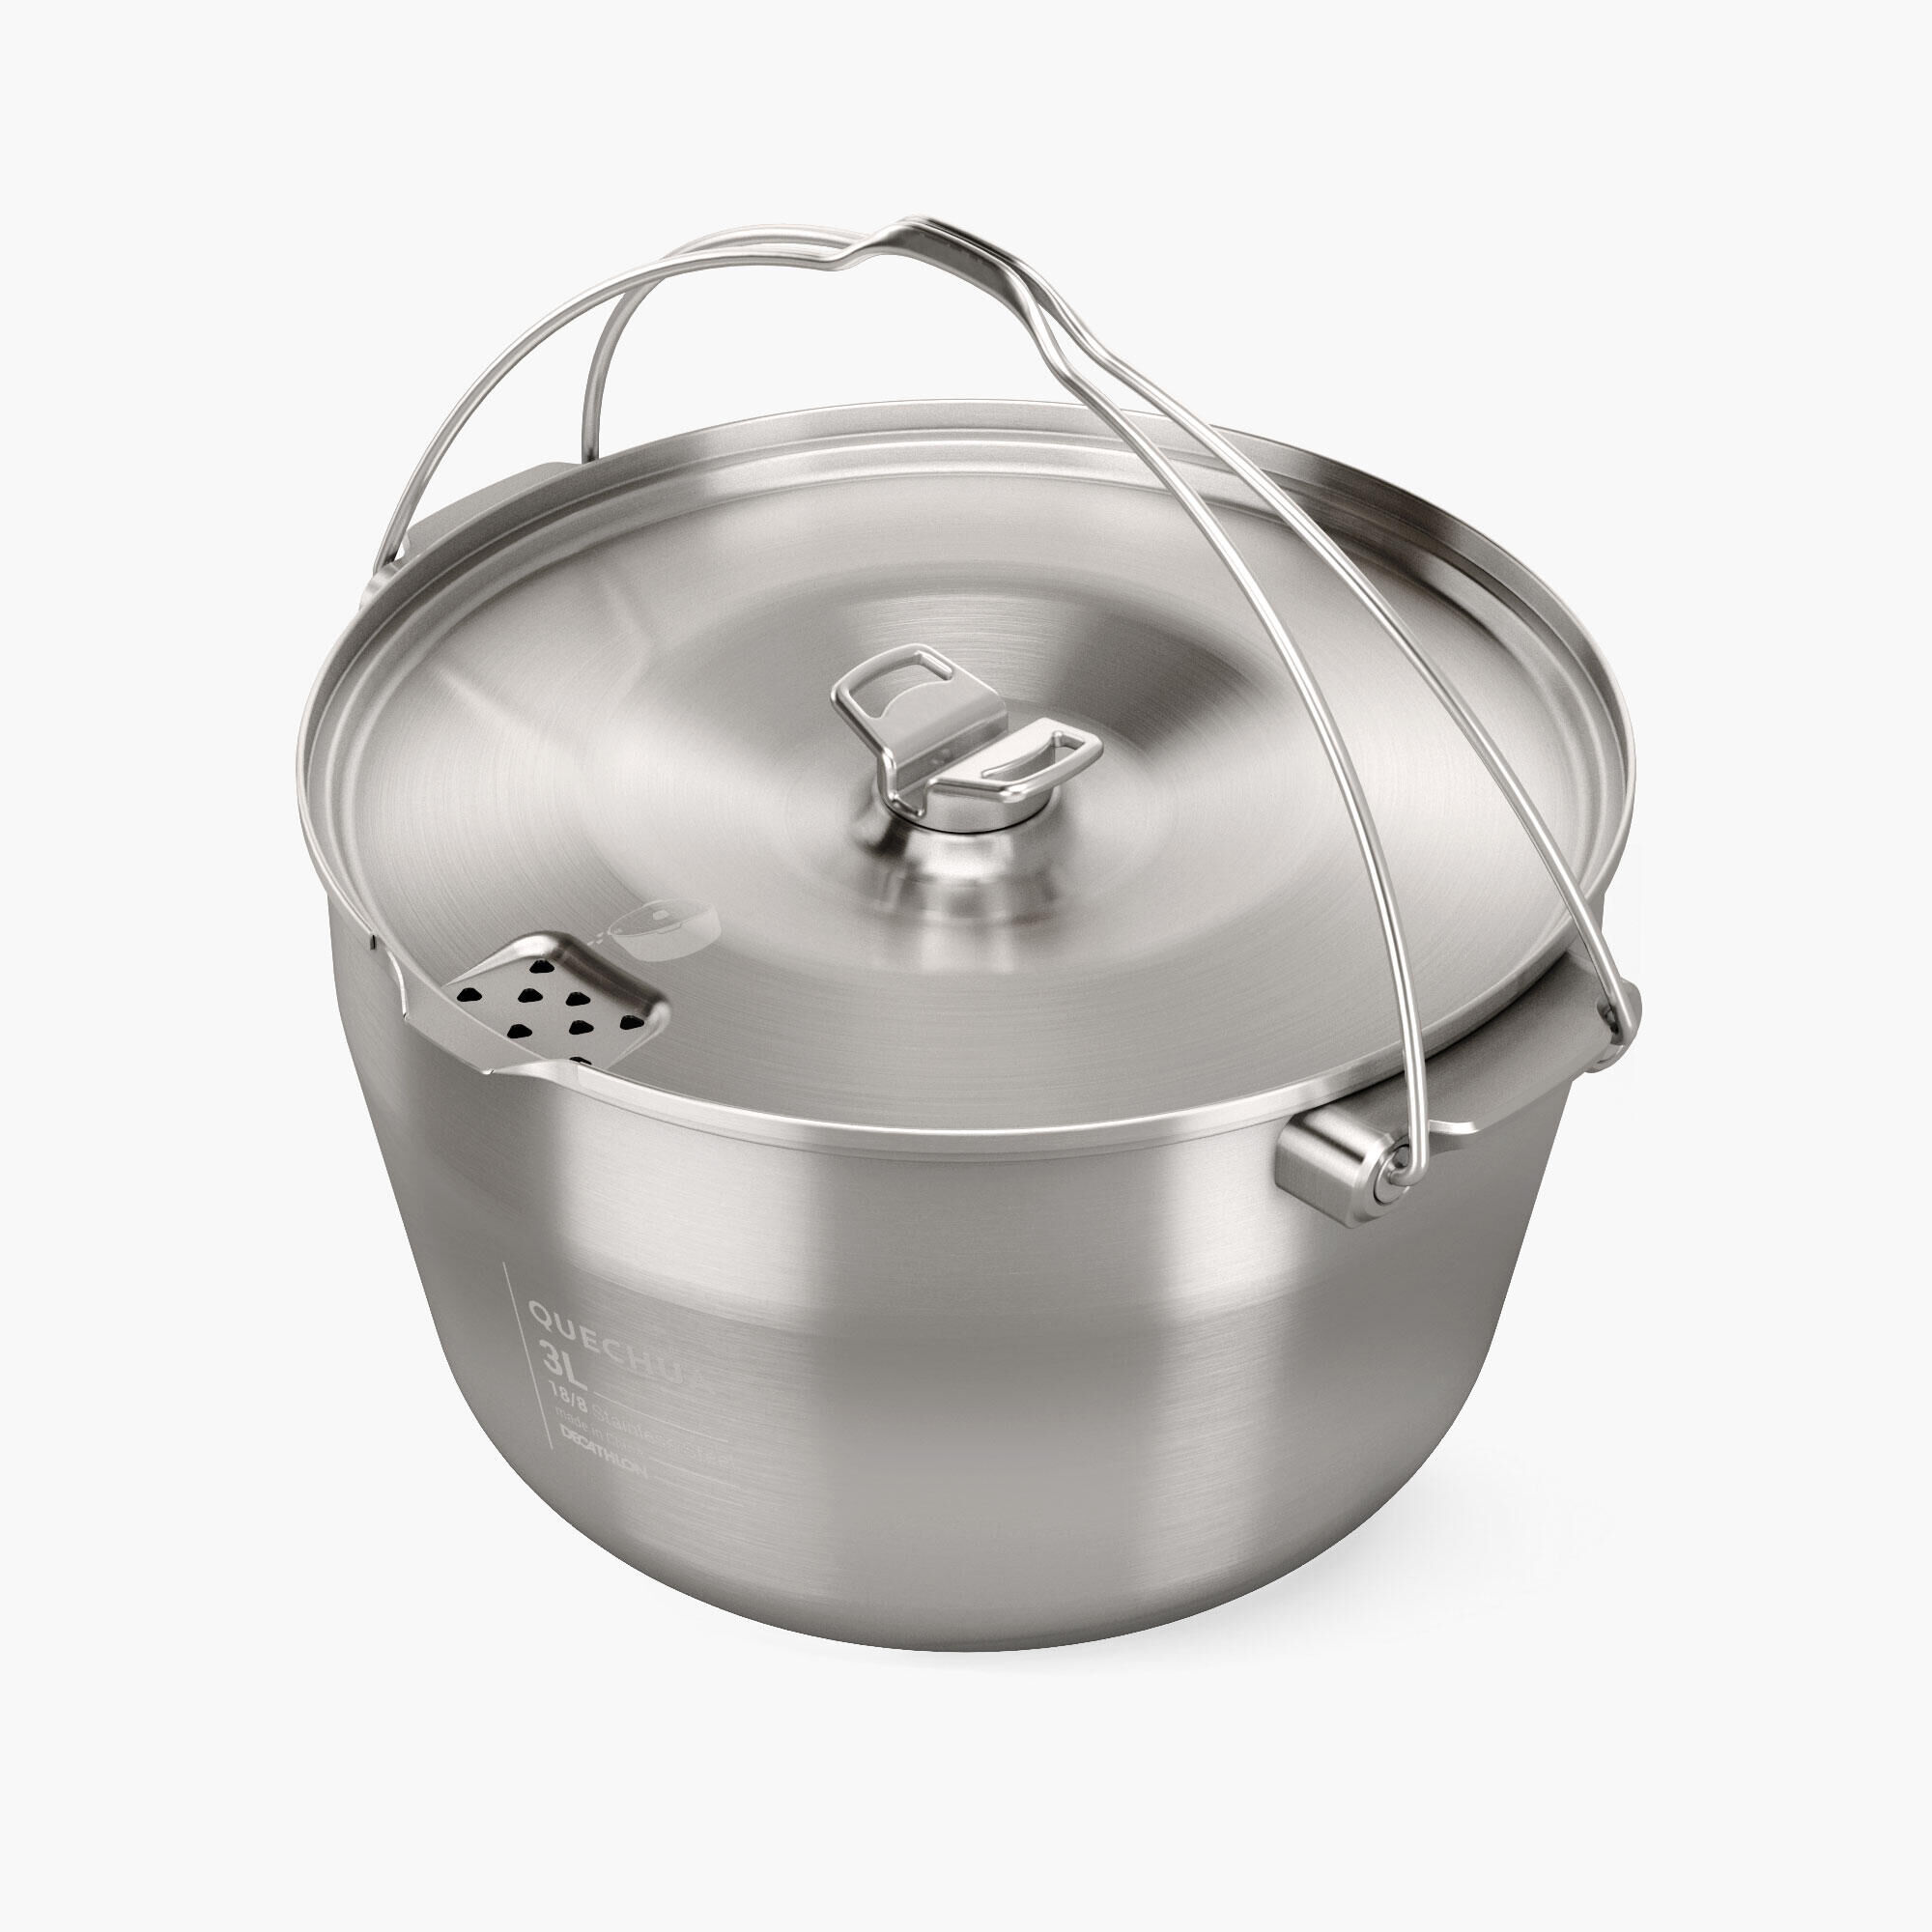 QUECHUA 4-person camp fire cooking pot - stainless steel -3 litres